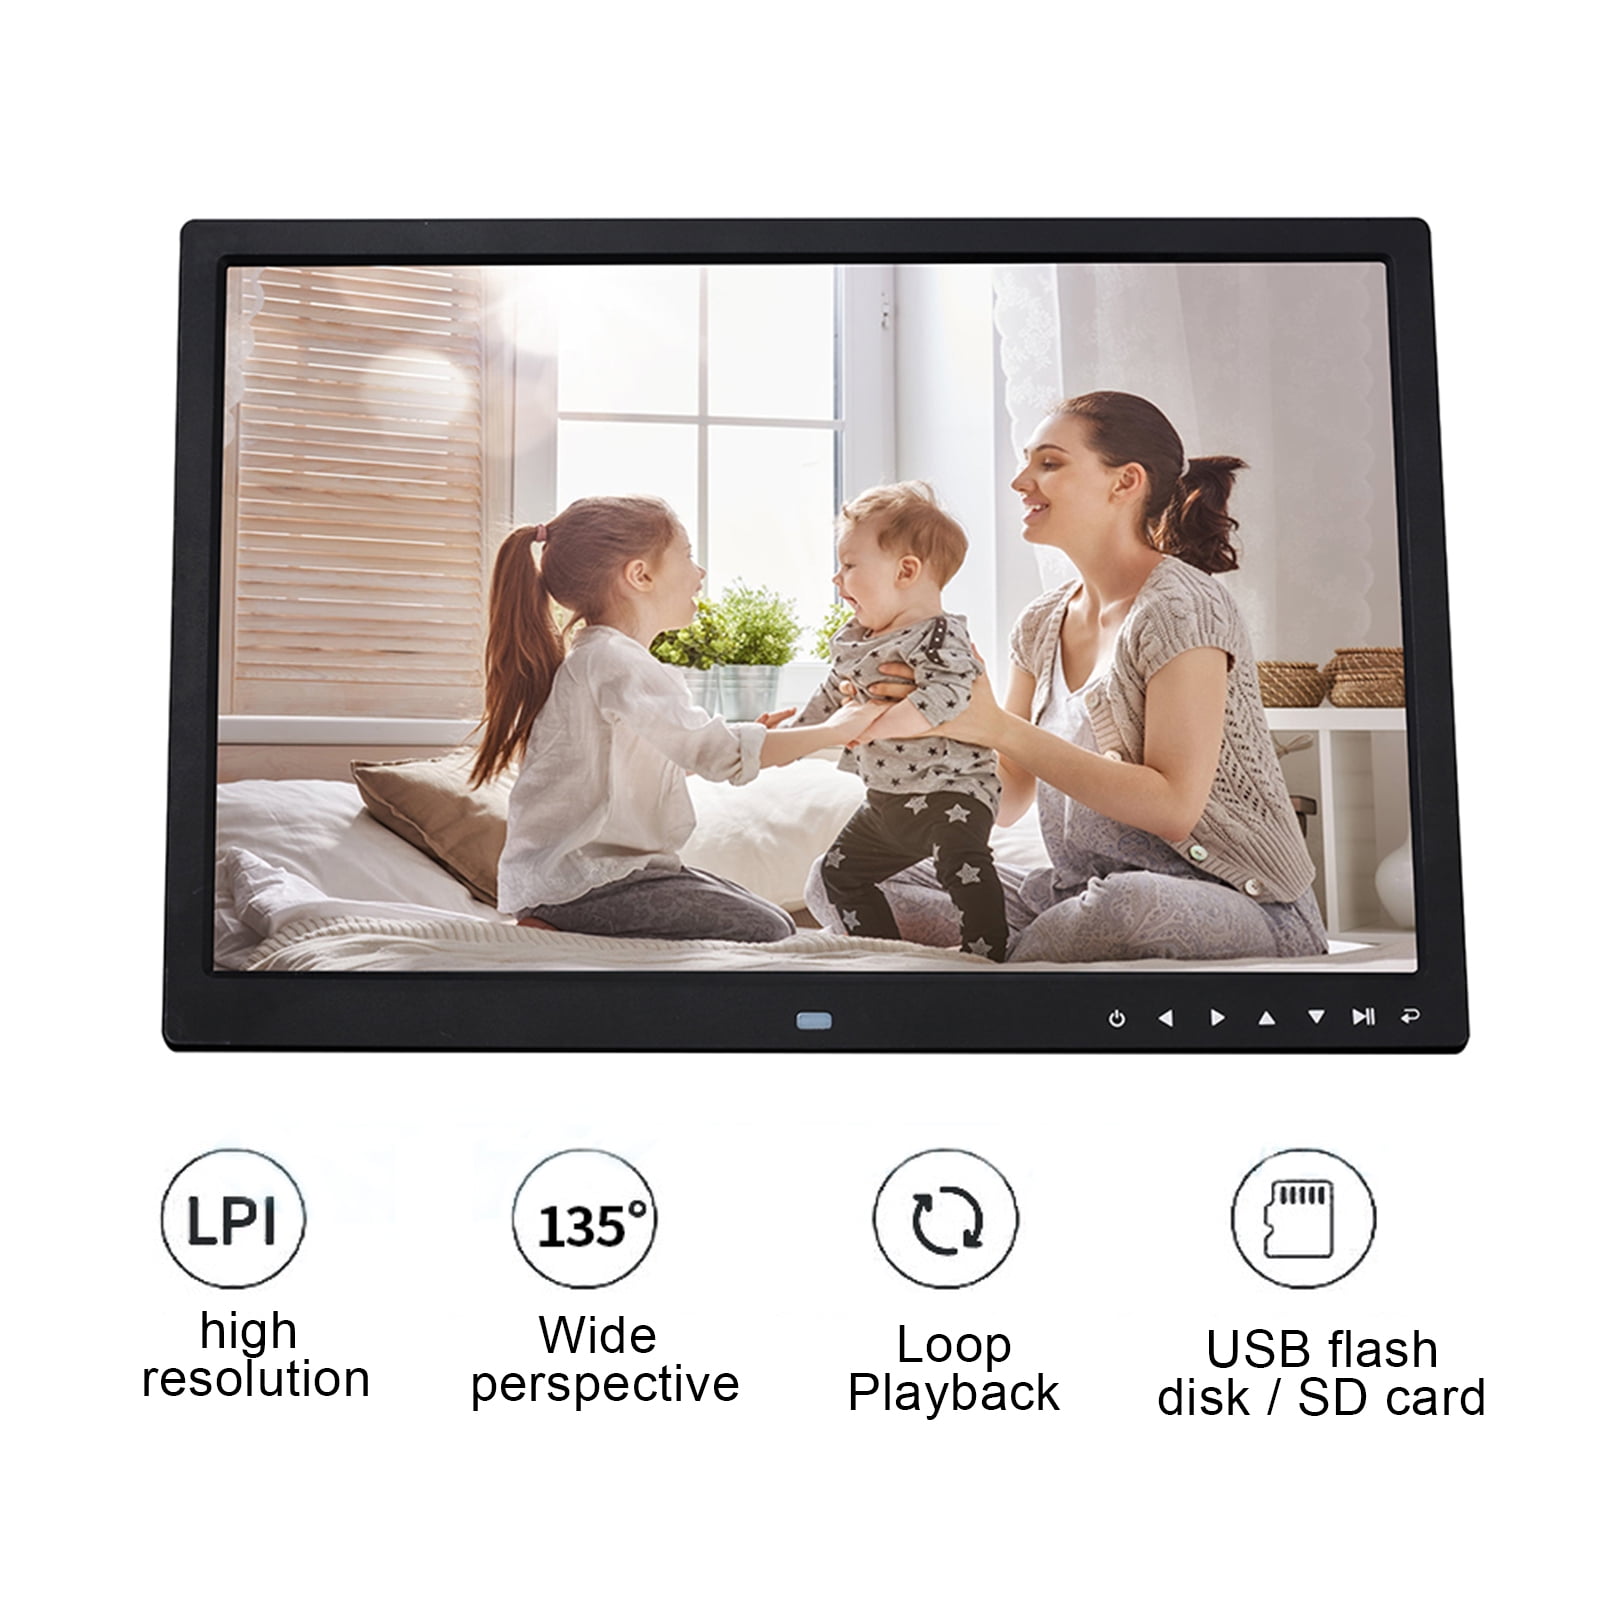 17 Inch Tft Screen Hd Led Backlight 1024 Energy Class A 768 Digital Photo Frame Electronic Album Picture Music Ultra-Thin Widescreen Full Format White